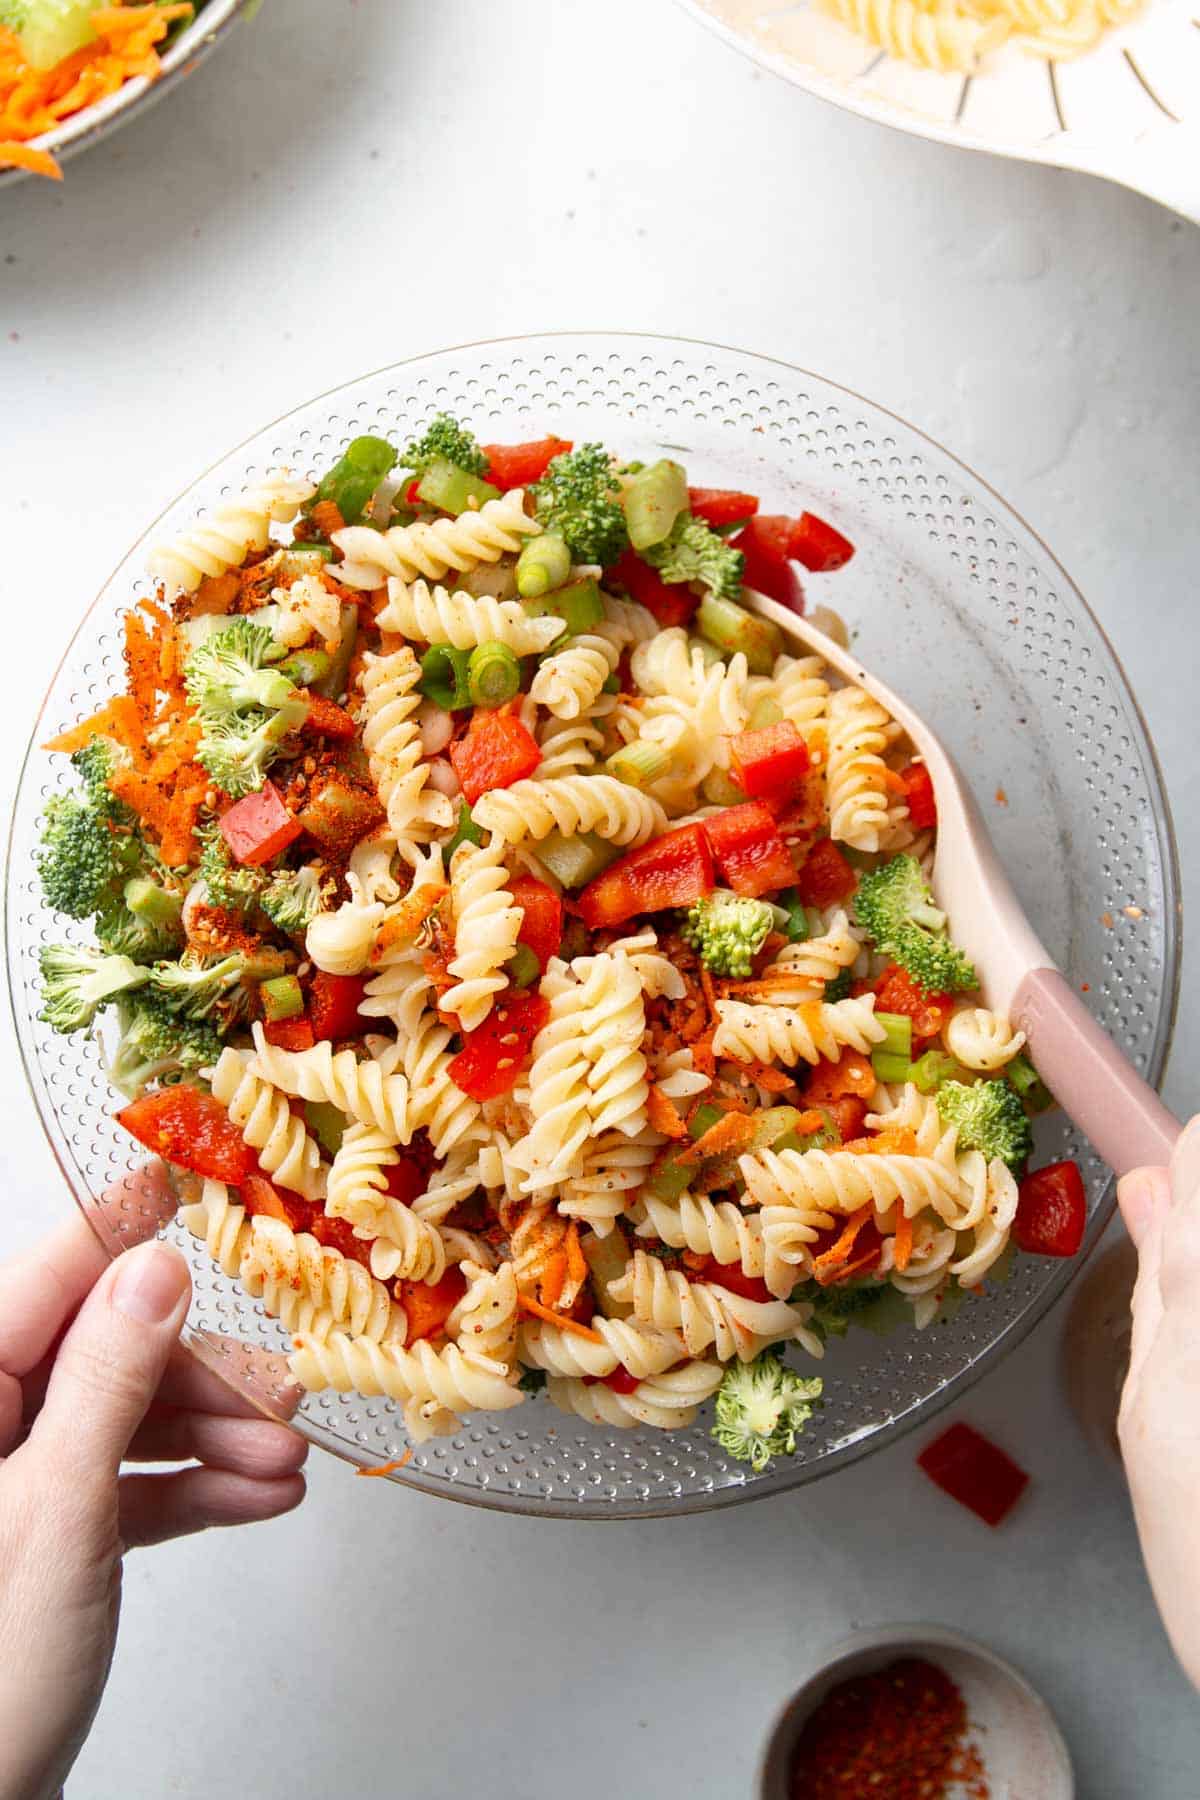 Using slotted spoon to toss pasta salad in large bowl.